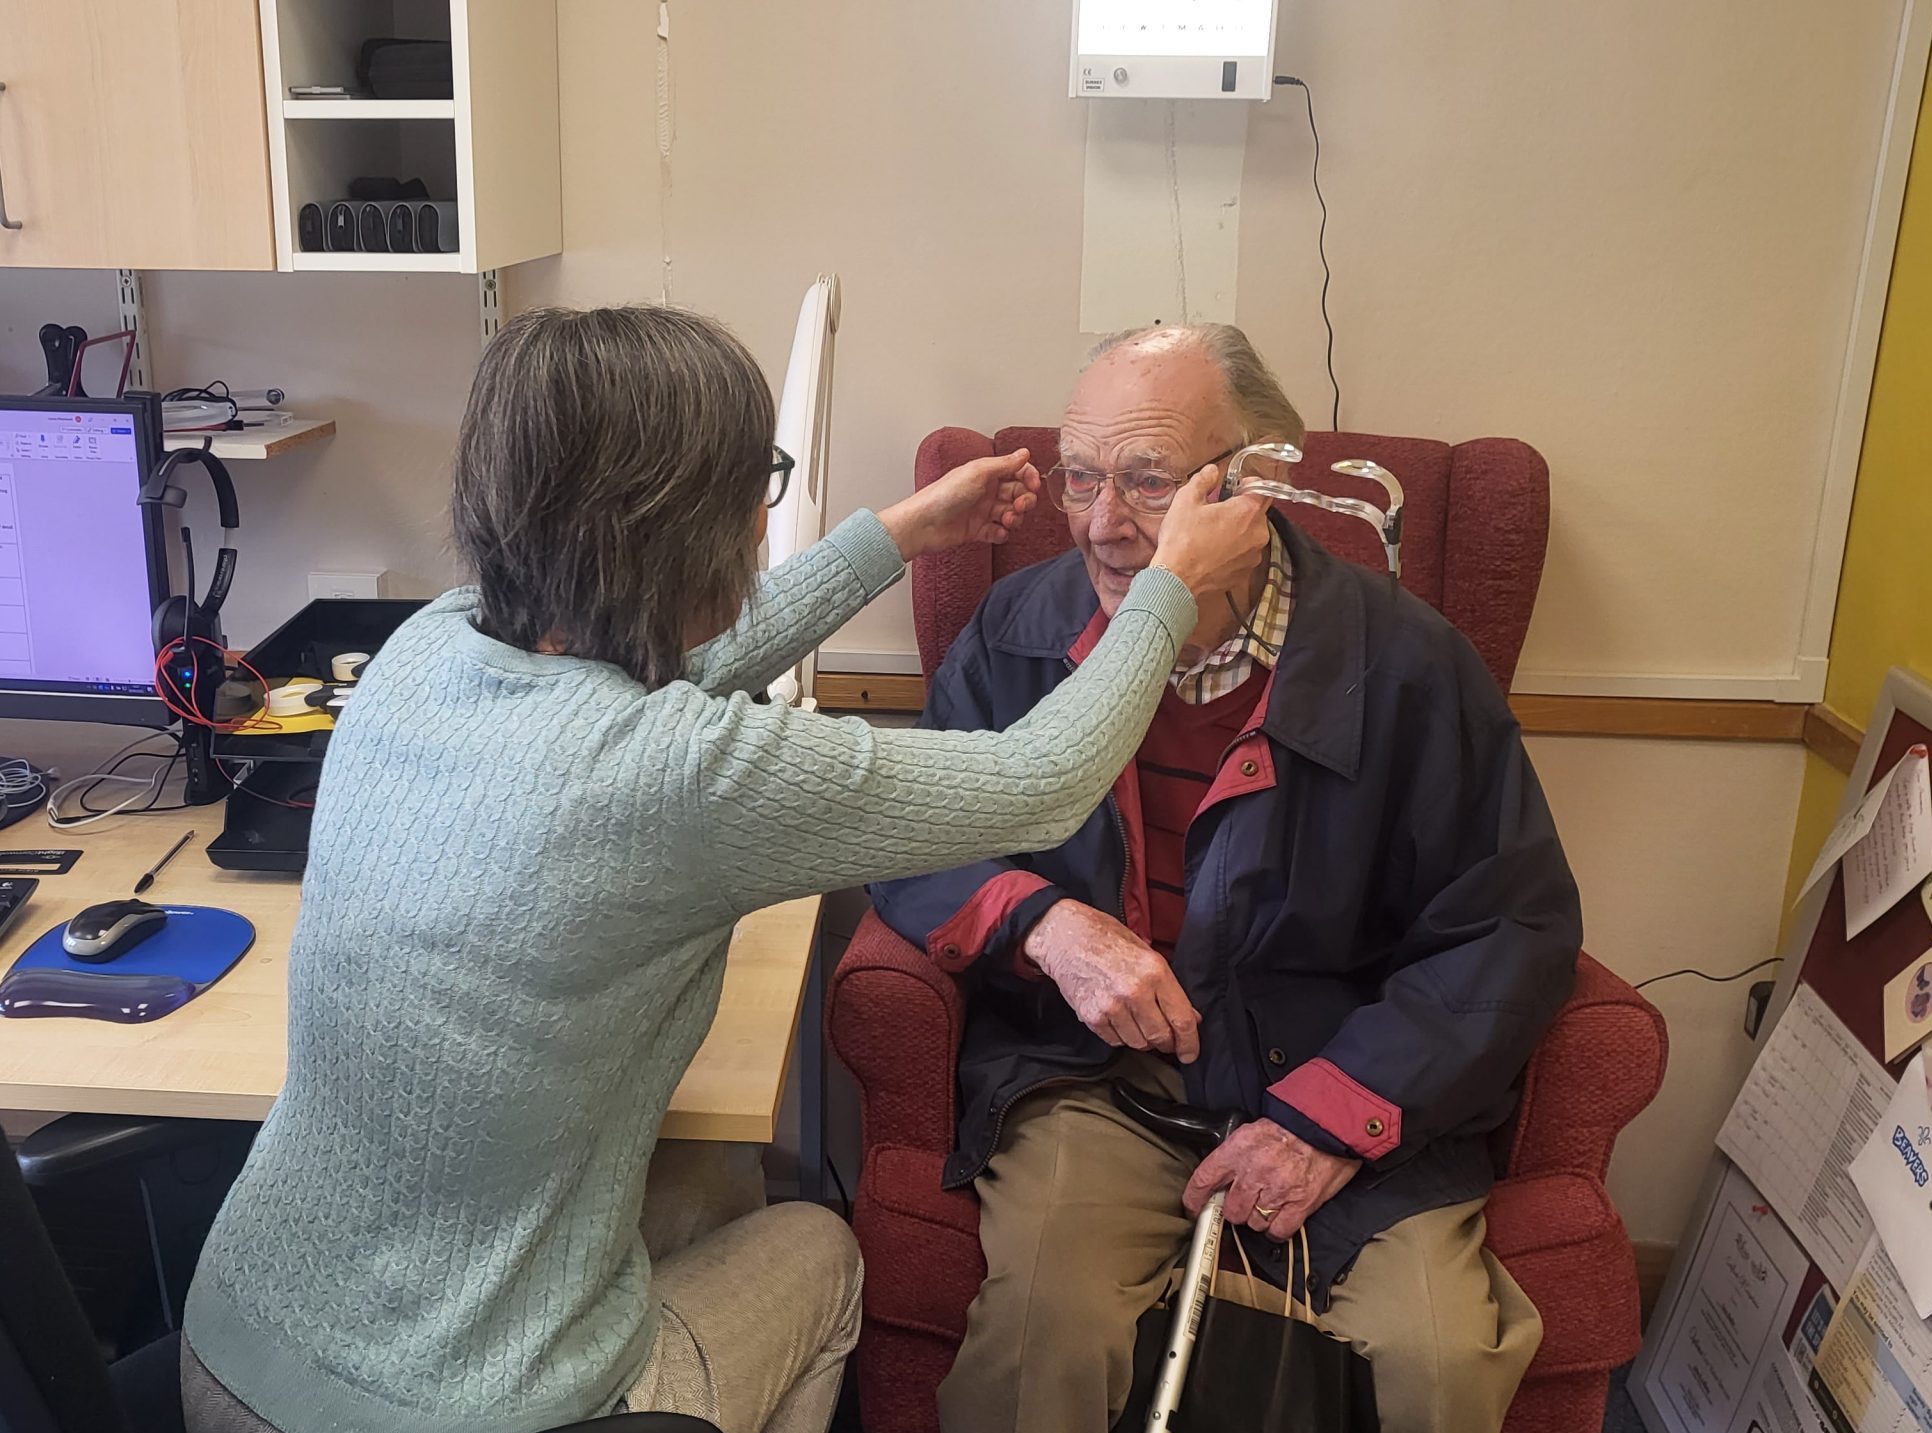 A man sits in a comfy chair looking at a woman. The woman is holding some MaxTV glasses in her hand and is adjusting the man's glasses on his face.